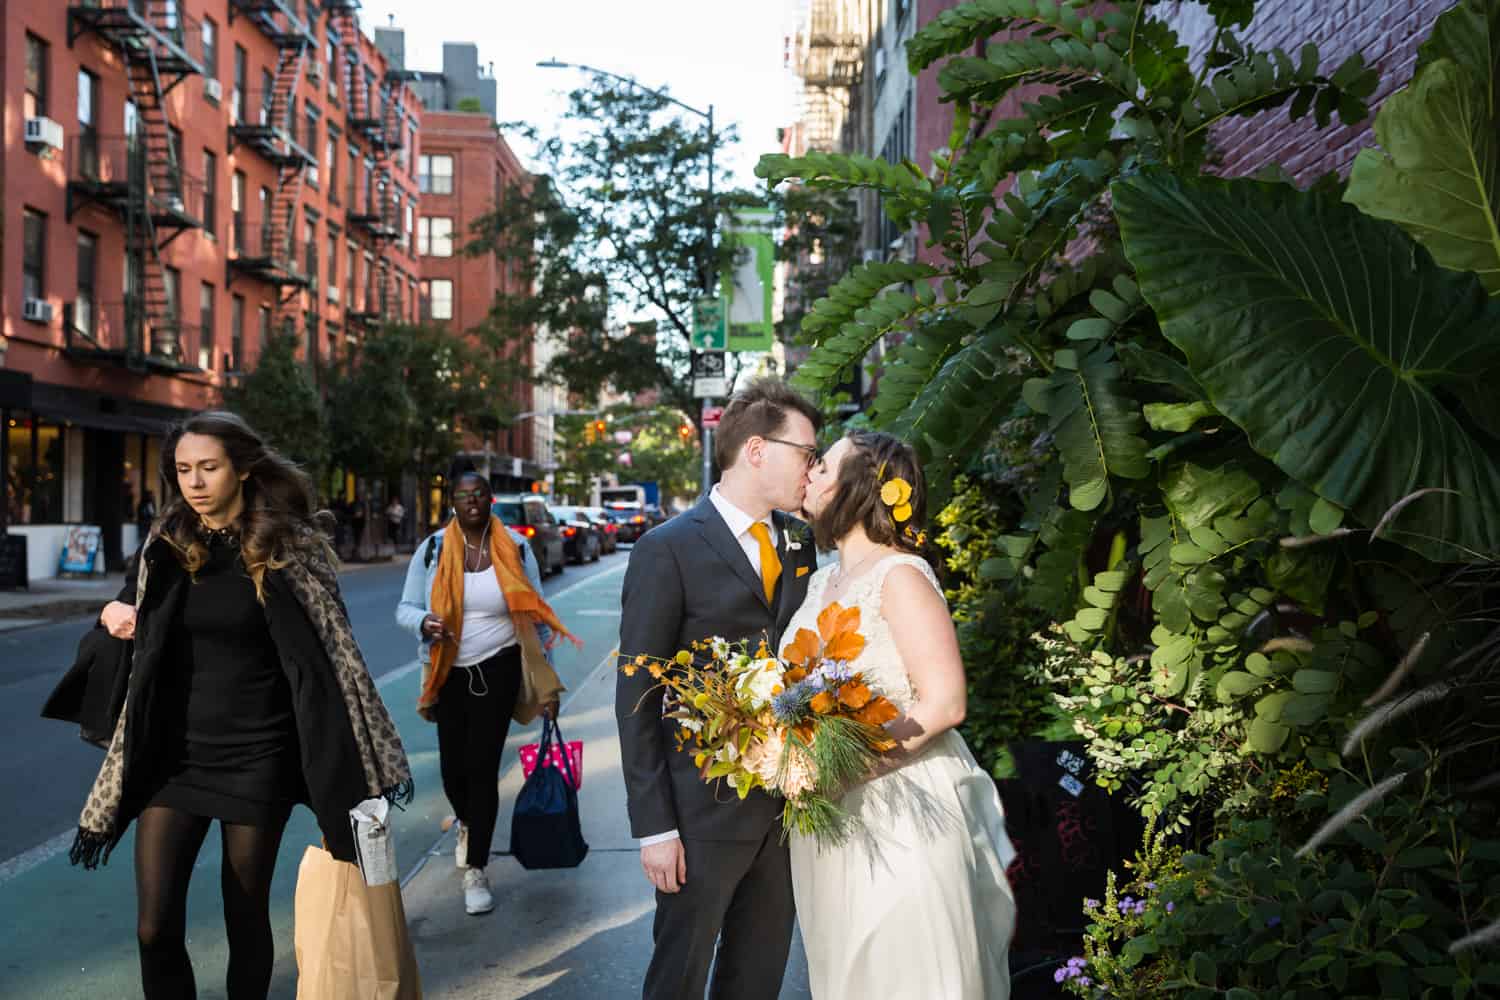 Bride and groom kissing on sidewalk for an article on Covid-19 wedding planning